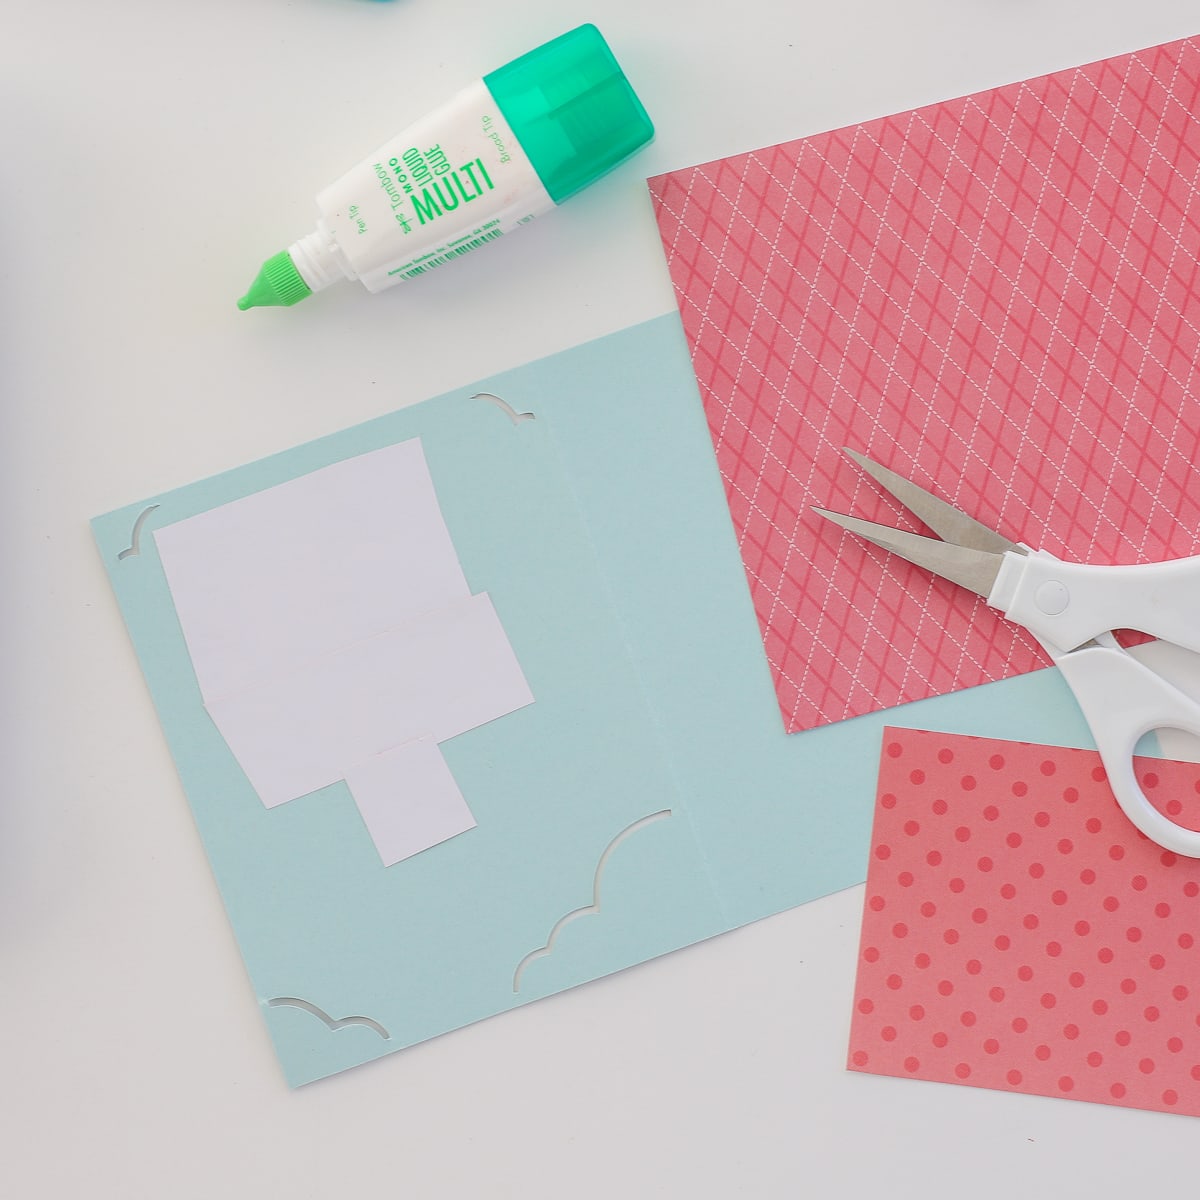 Various patterned papers are trimmed with scissors